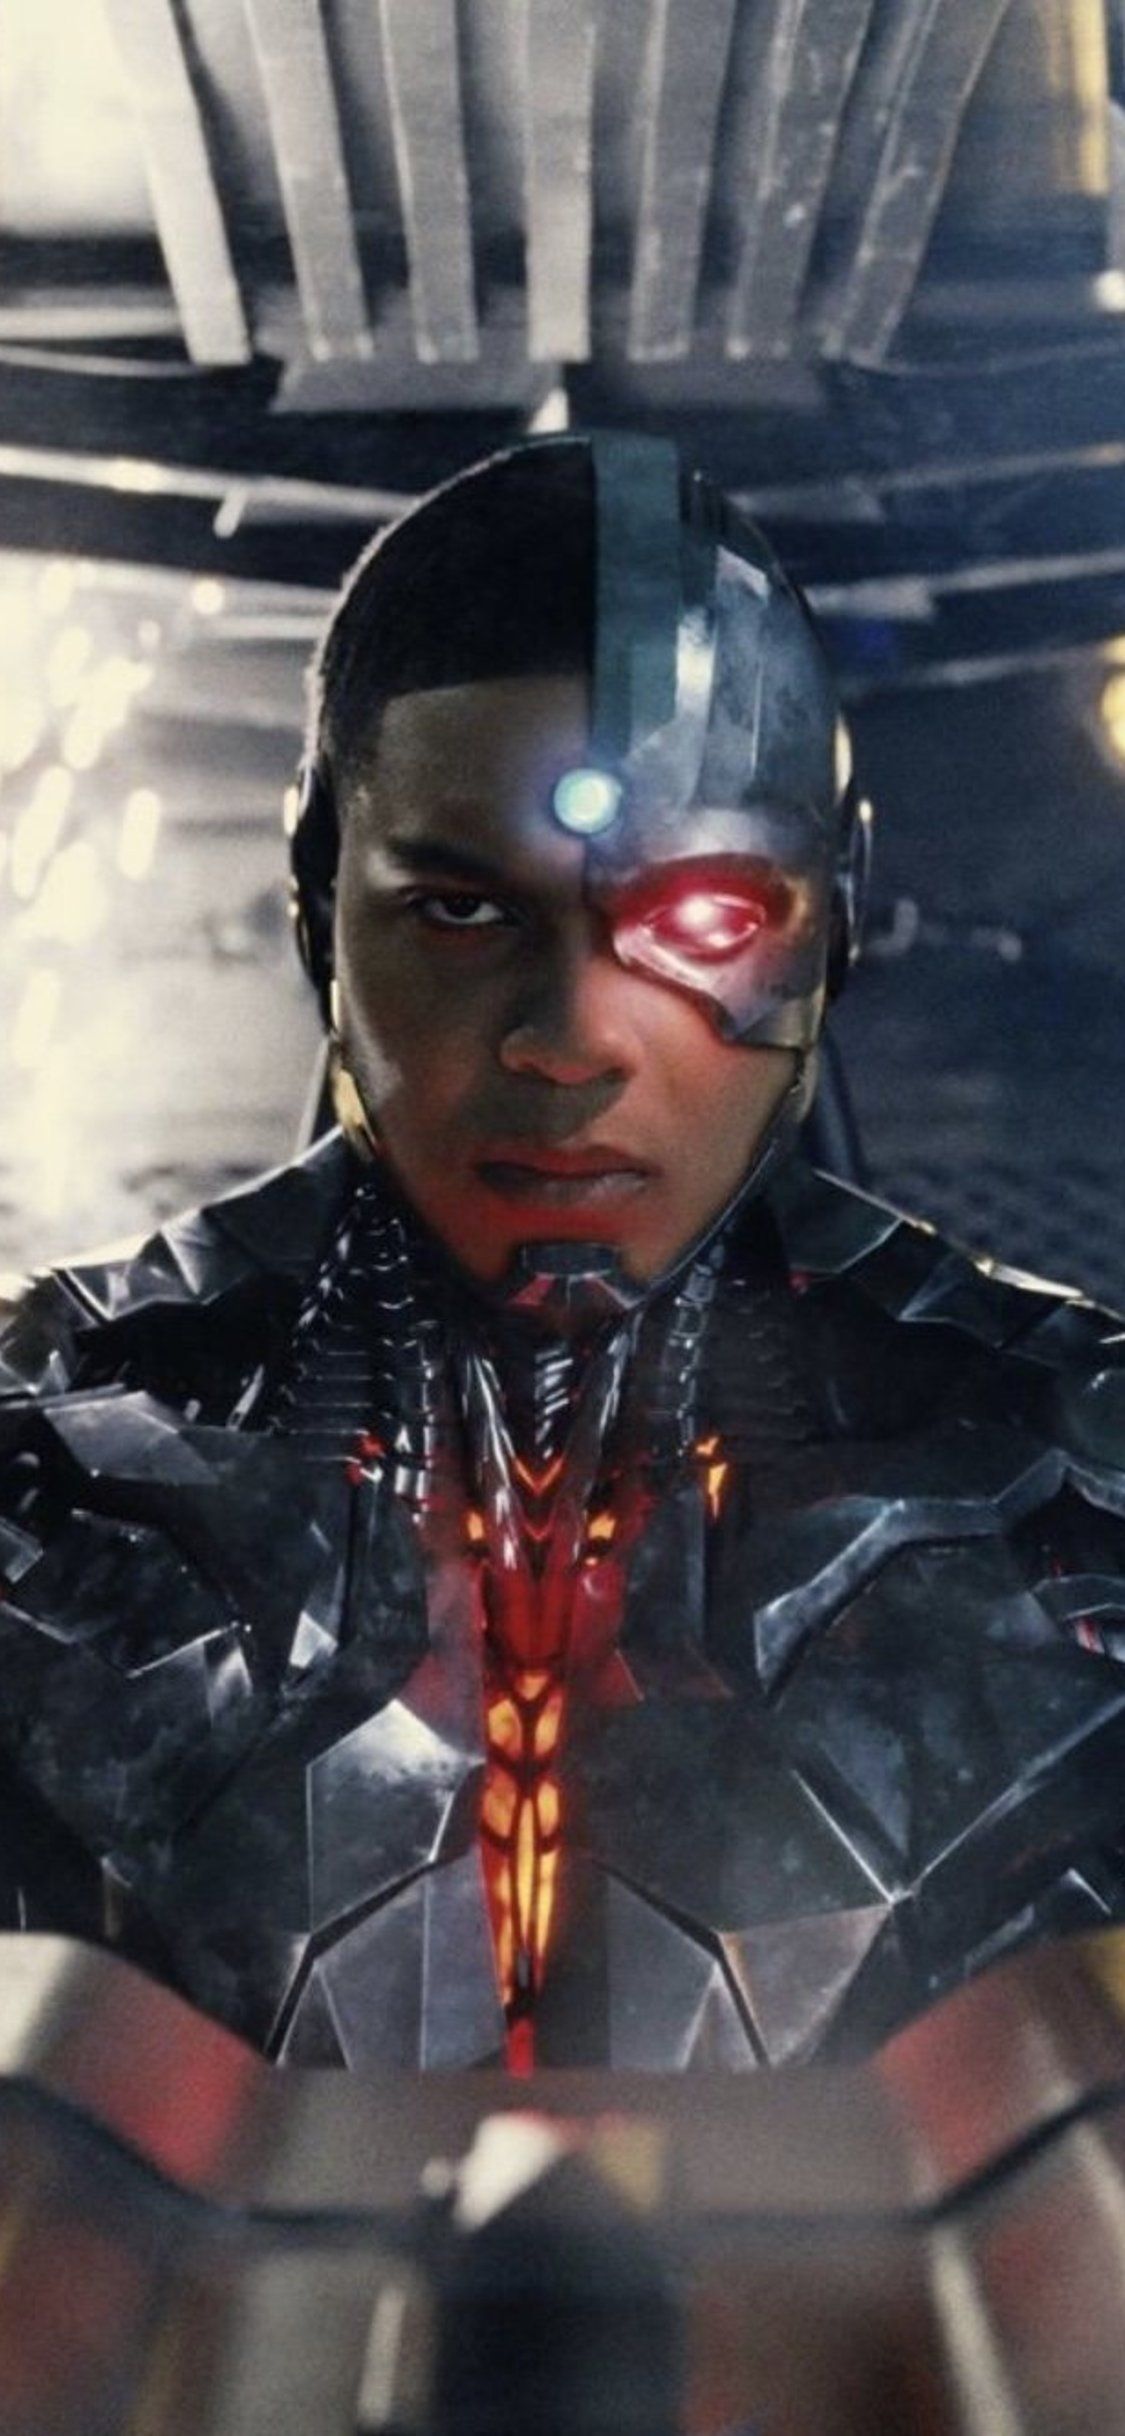 Cyborg Justice League HD iPhone XS, iPhone iPhone X HD 4k Wallpaper, Image, Back. Cyborg justice league, Justice league, Justice league HD wallpaper